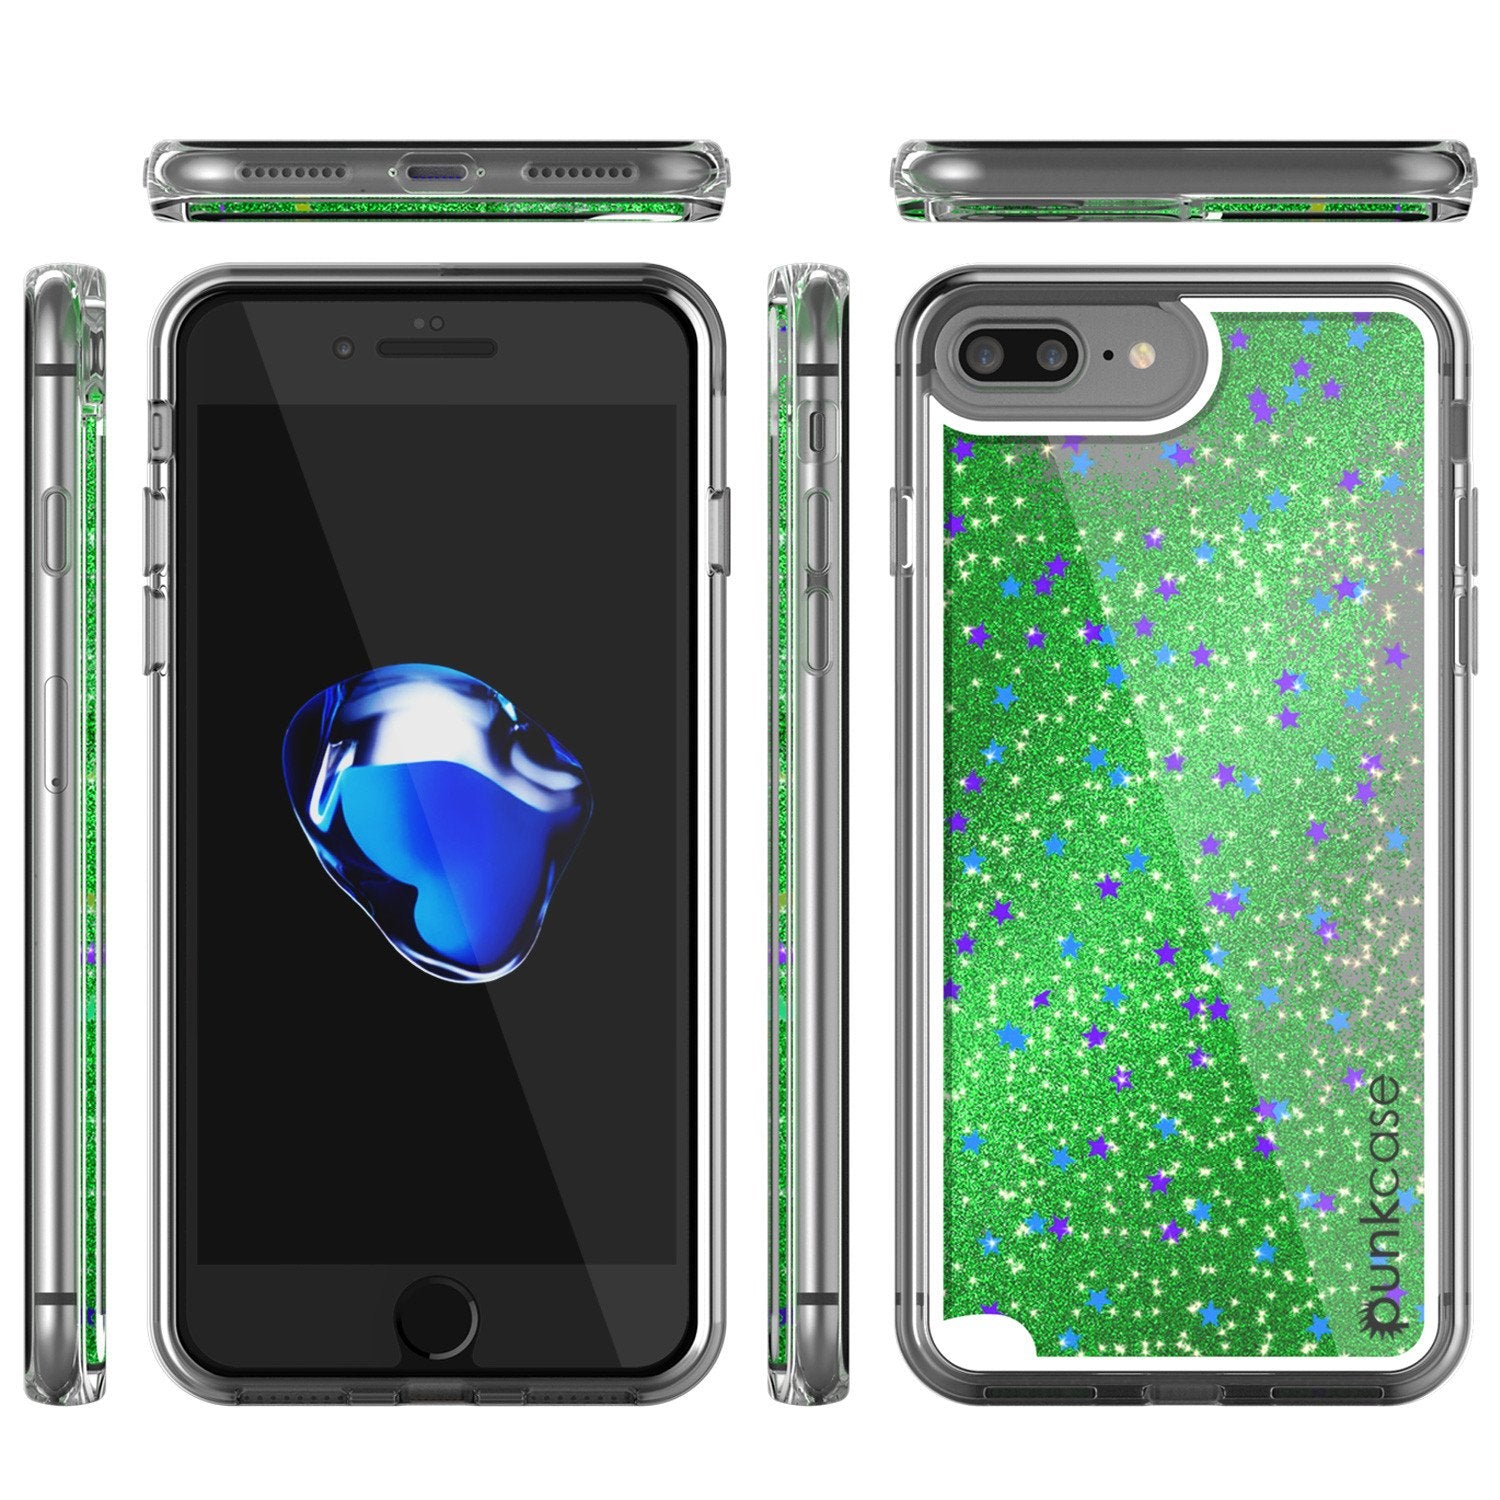 iPhone 7+ Plus Case, PunkCase LIQUID Green Series, Protective Dual Layer Floating Glitter Cover - PunkCase NZ